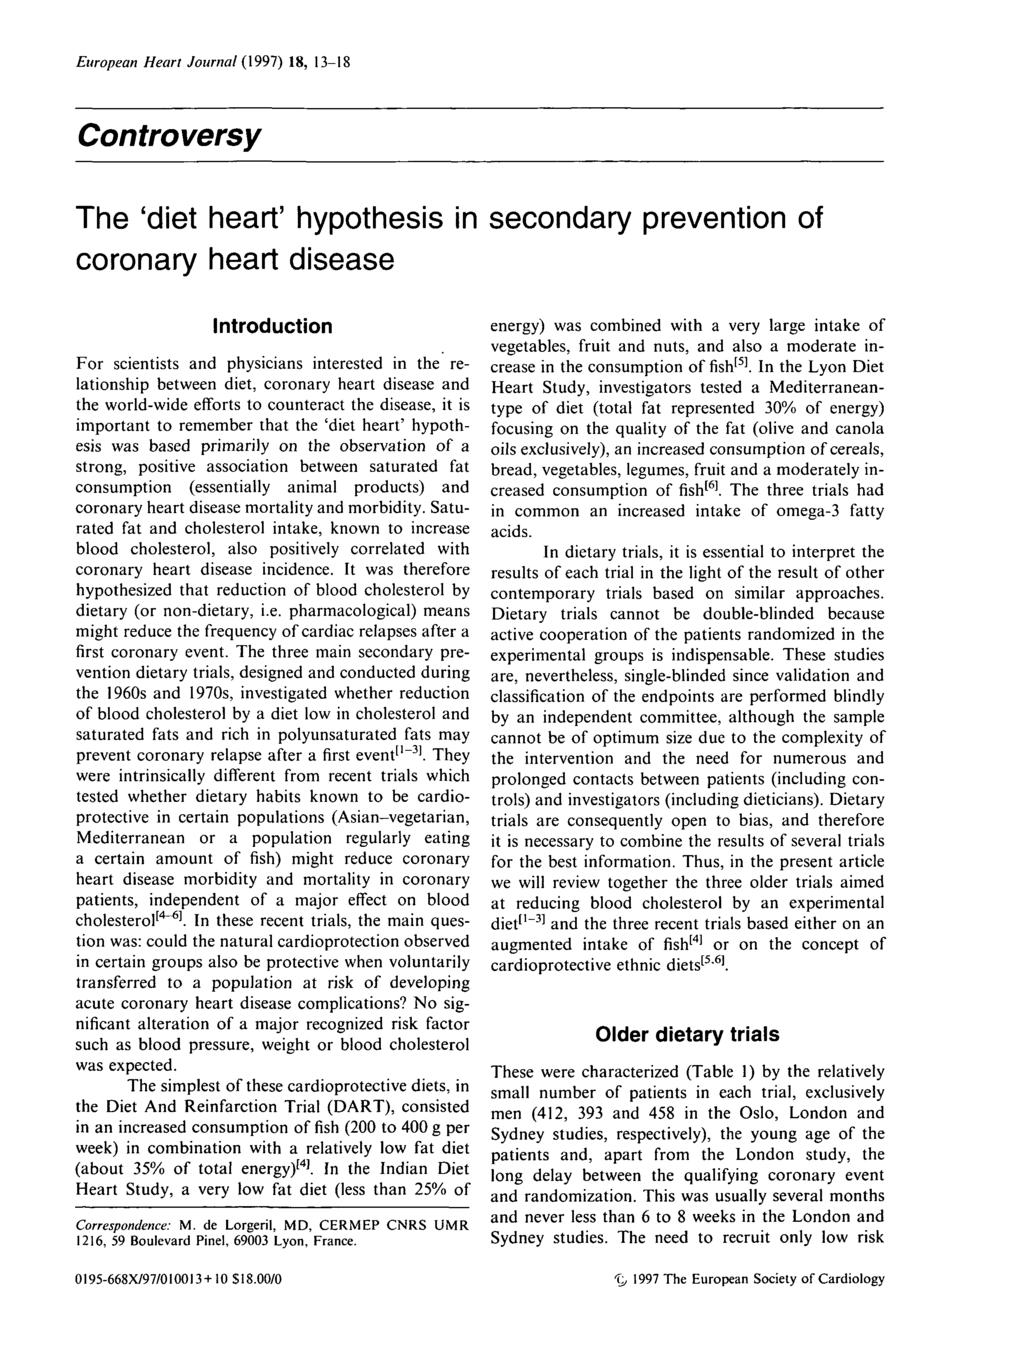 European Heart Journal (1997) 18, 13-18 Controversy The 'diet heart' hypothesis in secondary prevention of coronary heart disease Introduction For scientists and physicians interested in the